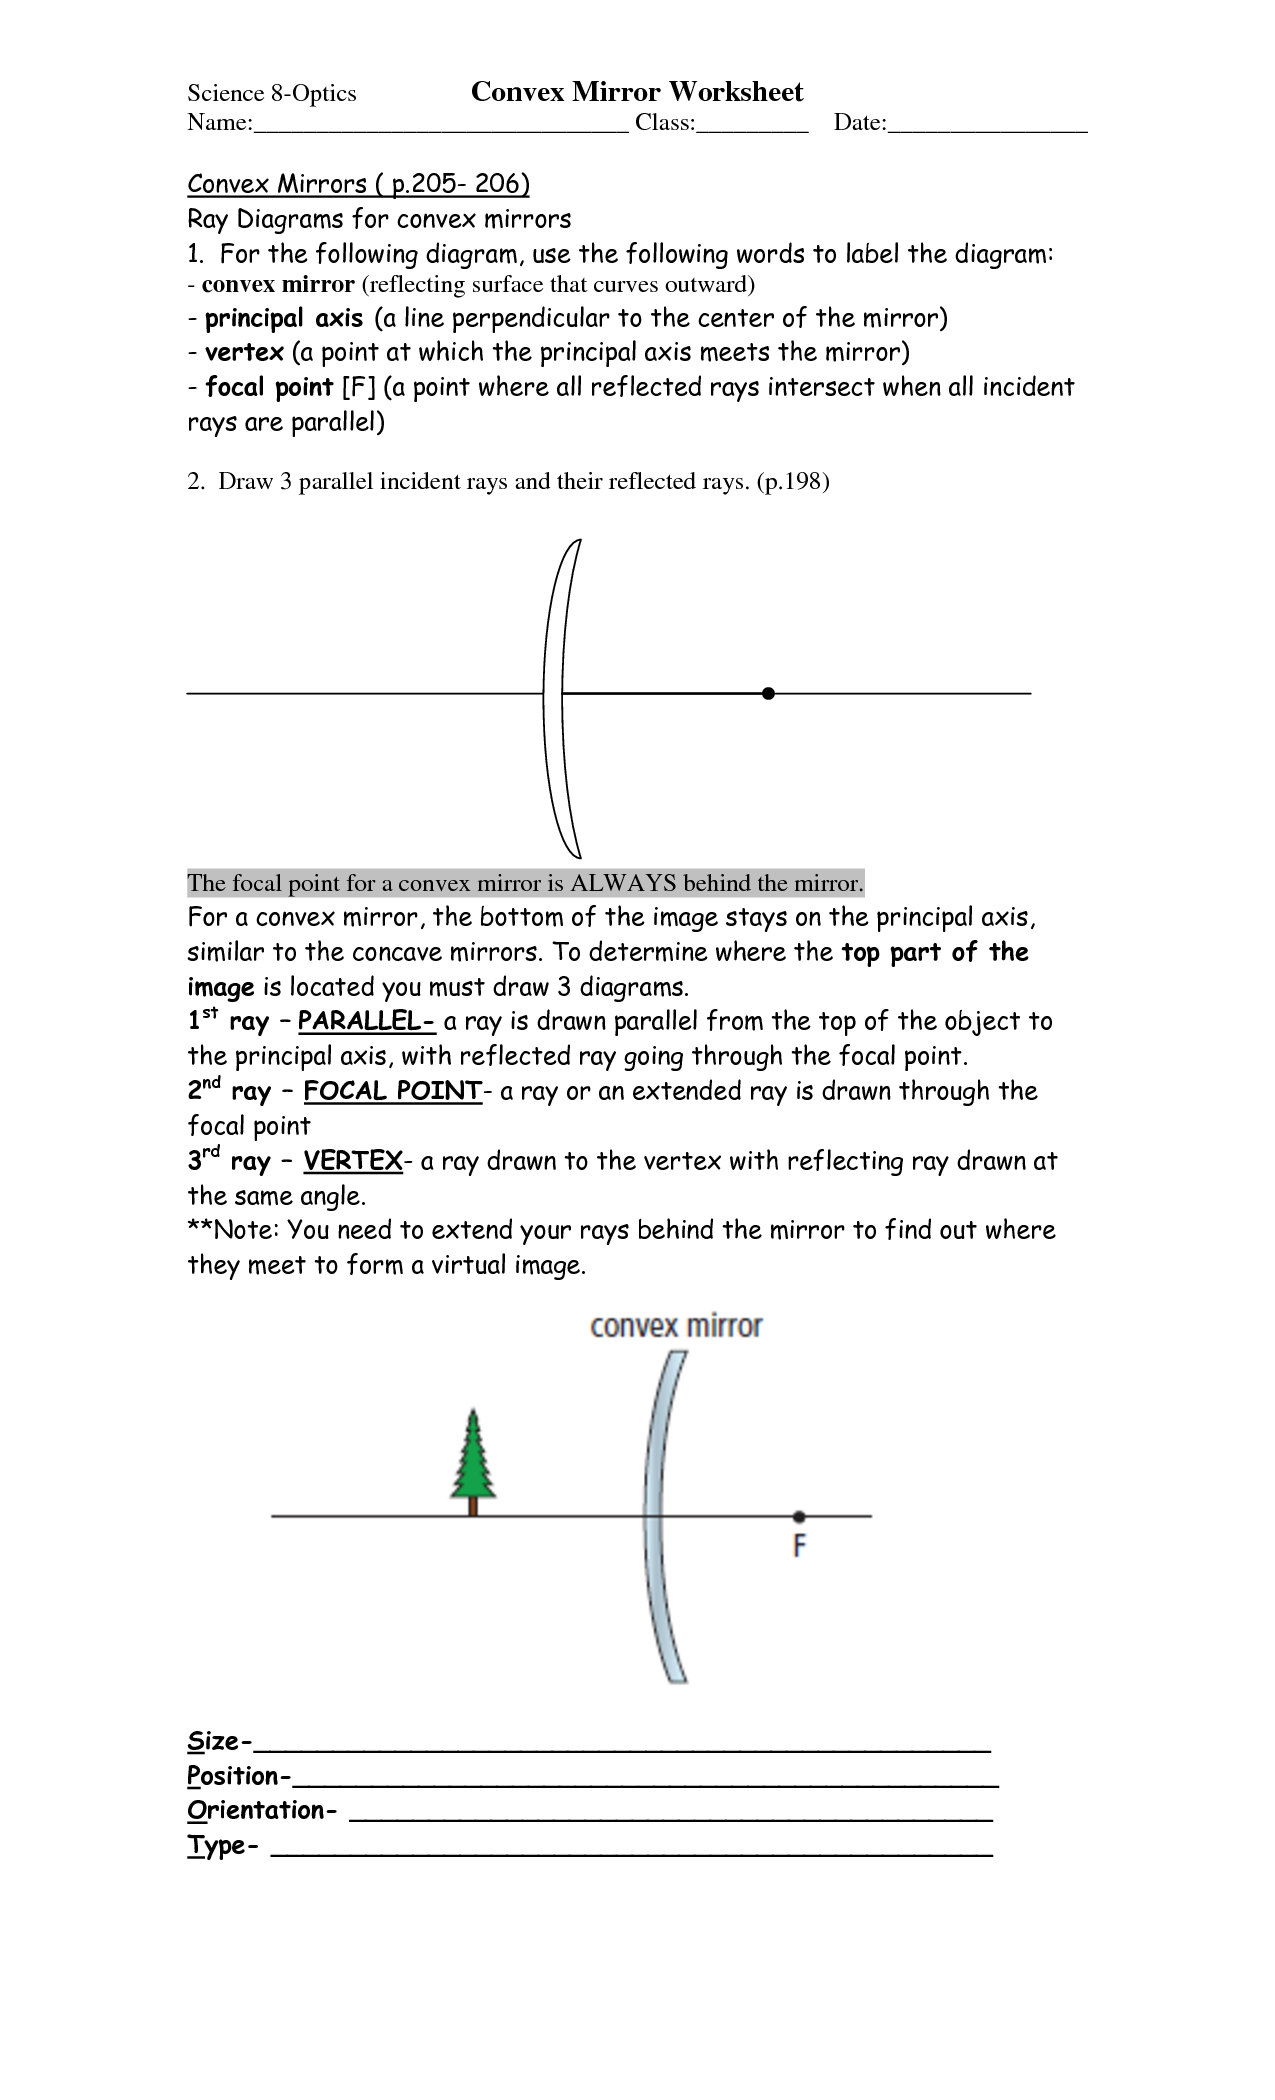 Mirror Ray Diagram Worksheet Answers